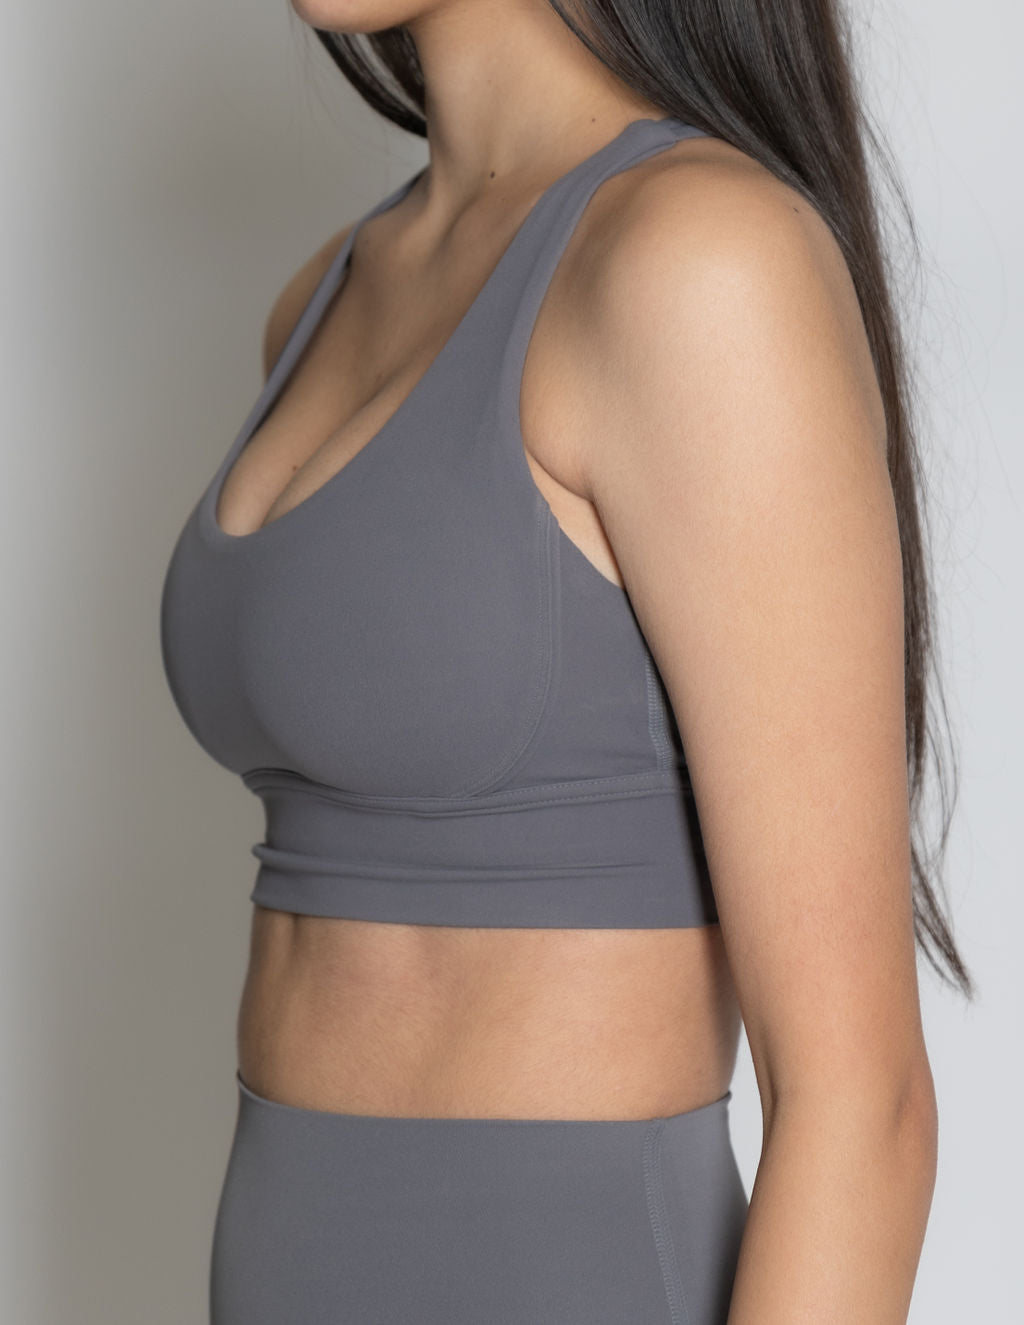 The Best Athleisure Wear: Sports Bra 2 for $50 - Karina Style Diaries